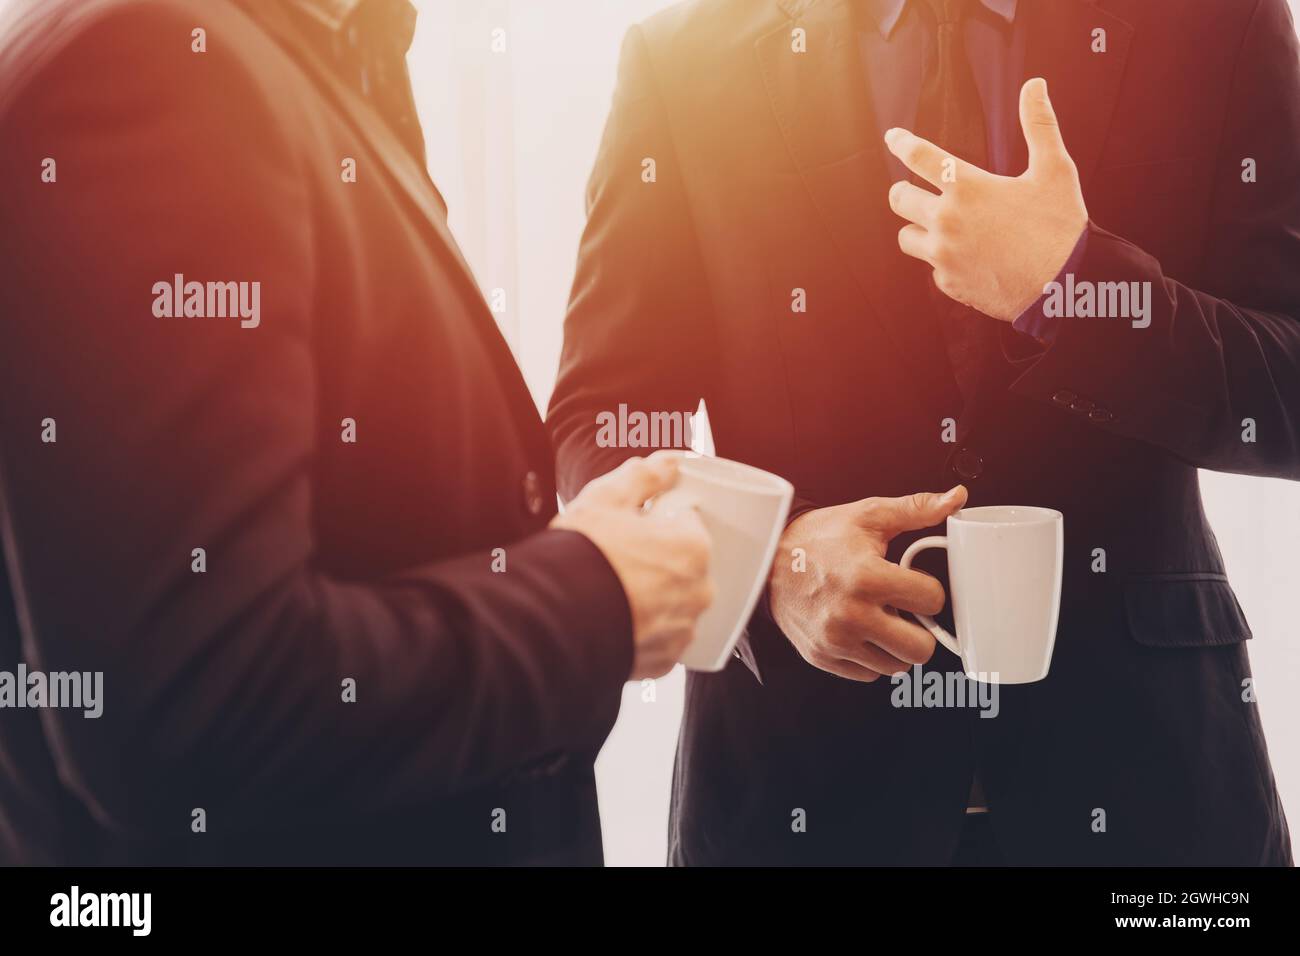 Two Business people standing talking discussion together with morning coffee mug in hand. Stock Photo